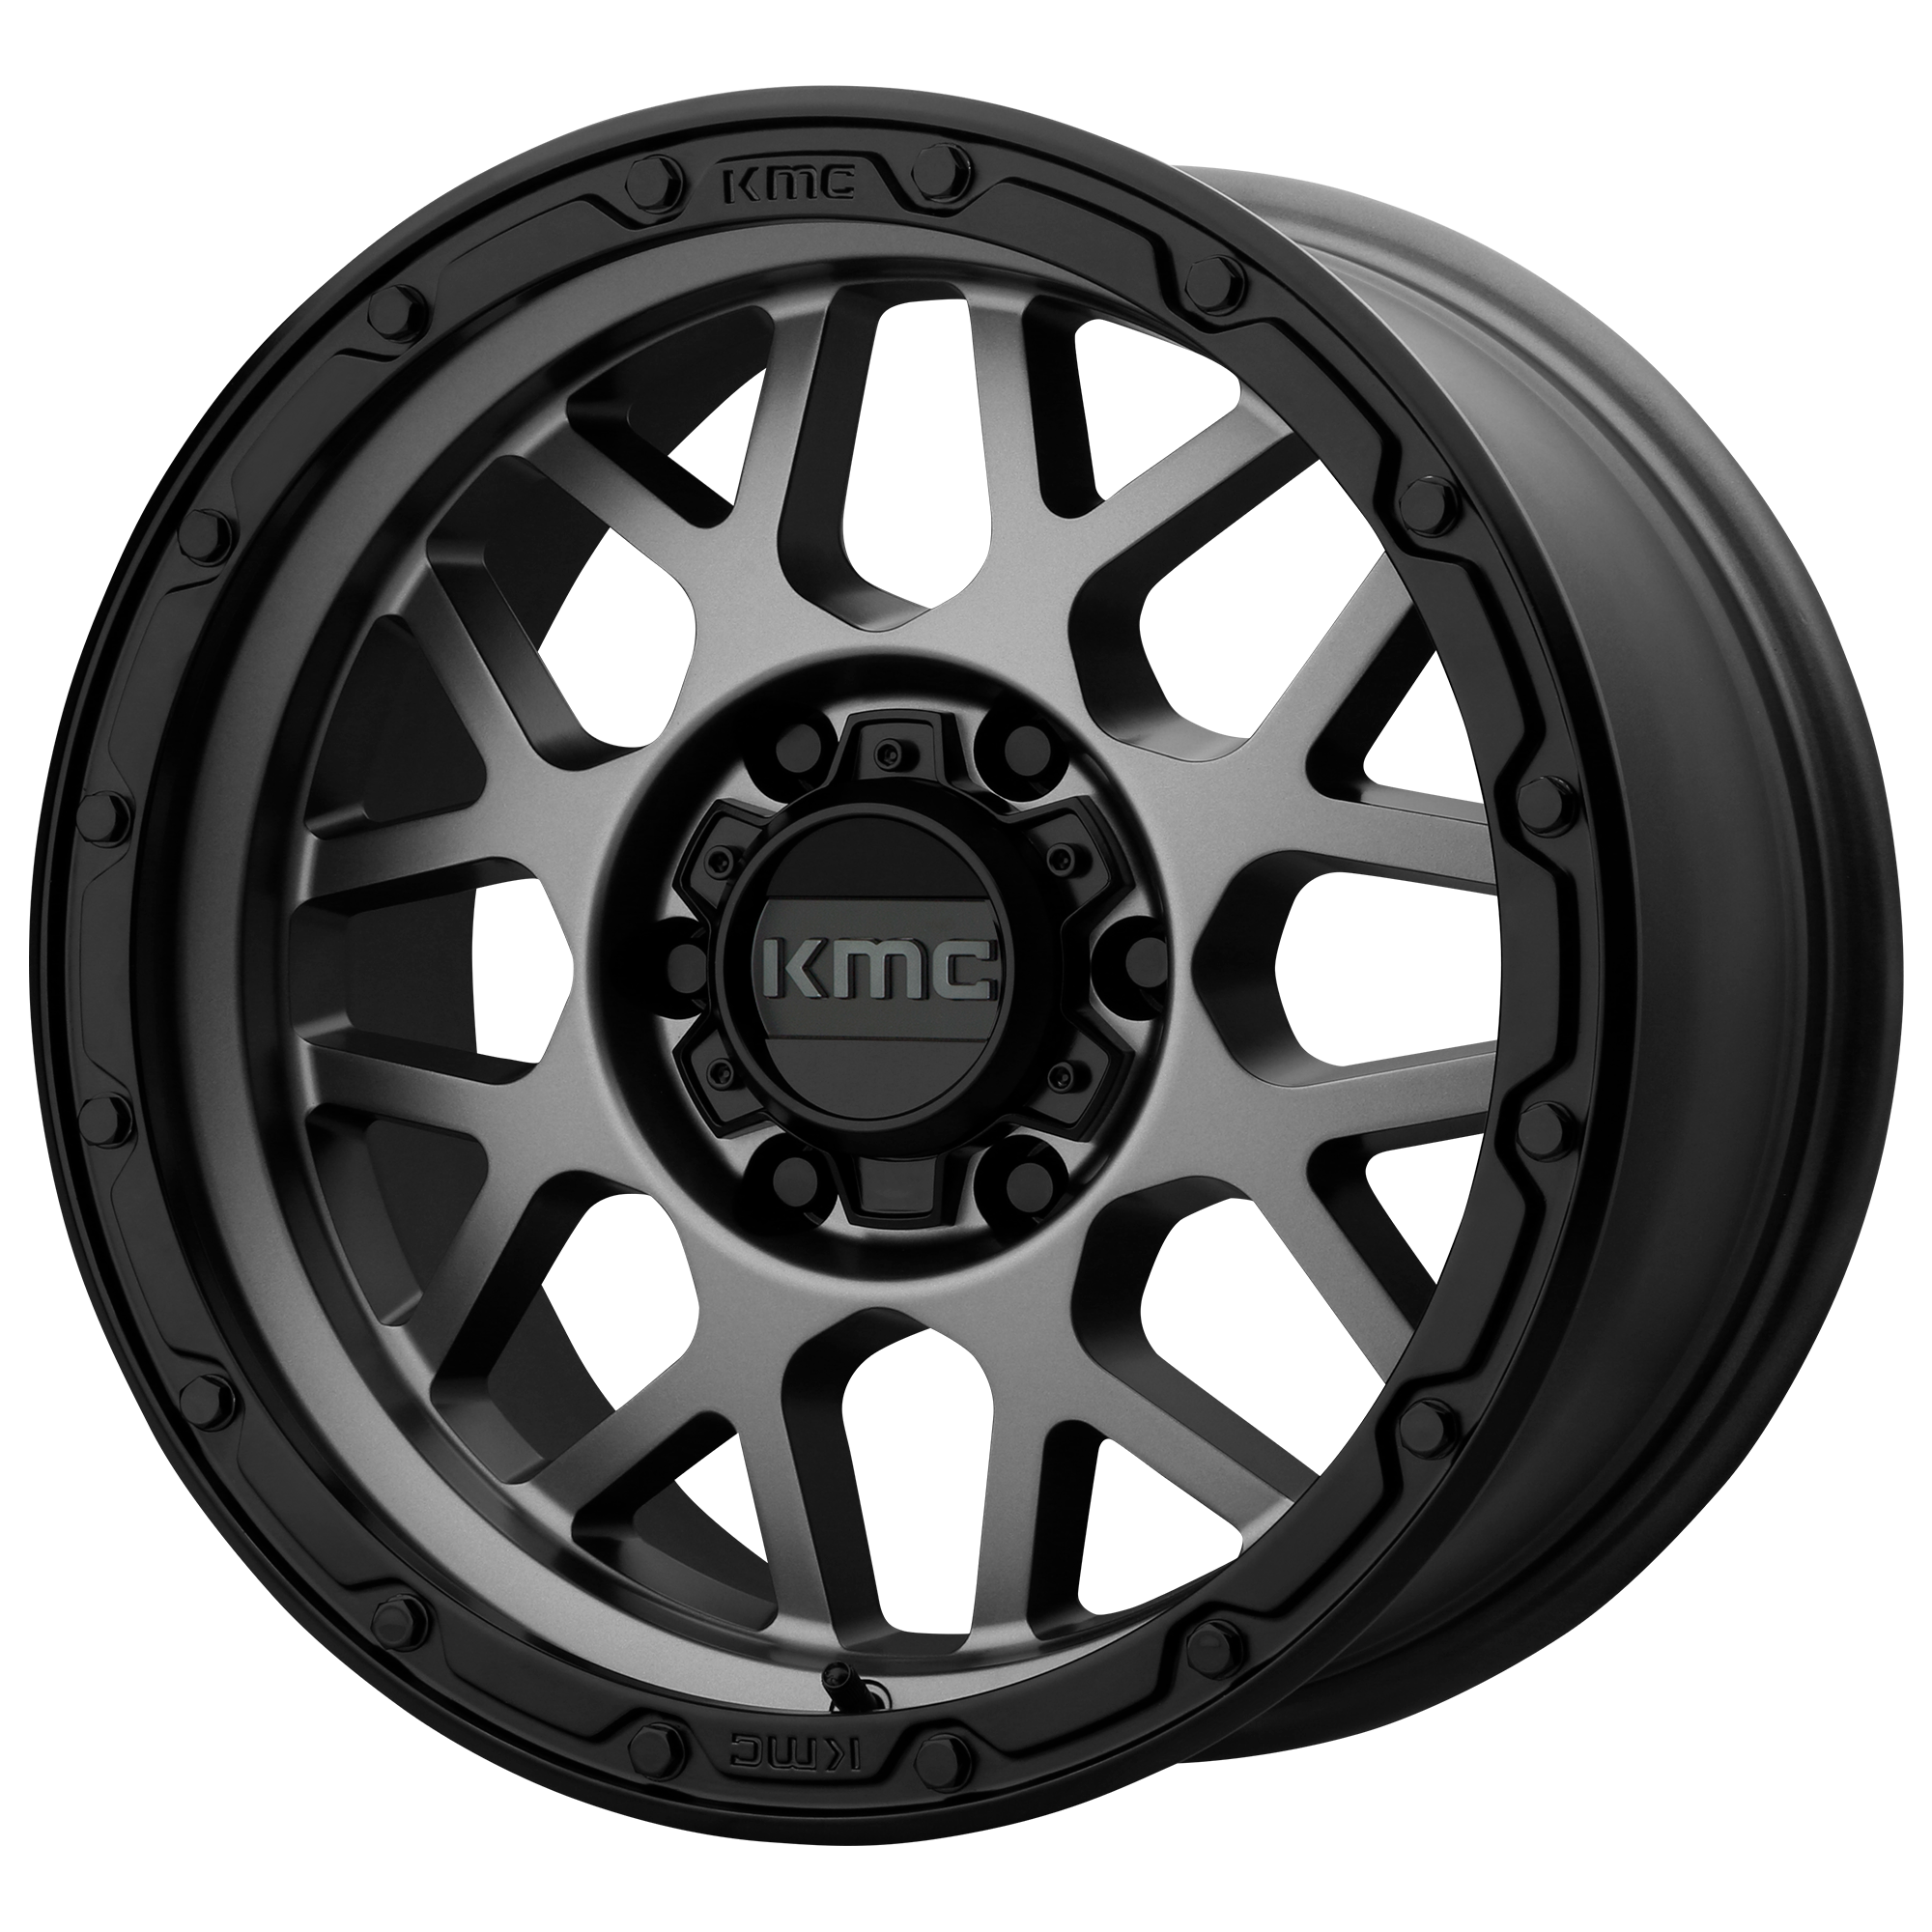 GRENADE OFF-ROAD 17x9 6x139.70 MATTE GRAY W/ MATTE BLACK LIP (18 mm) - Tires and Engine Performance